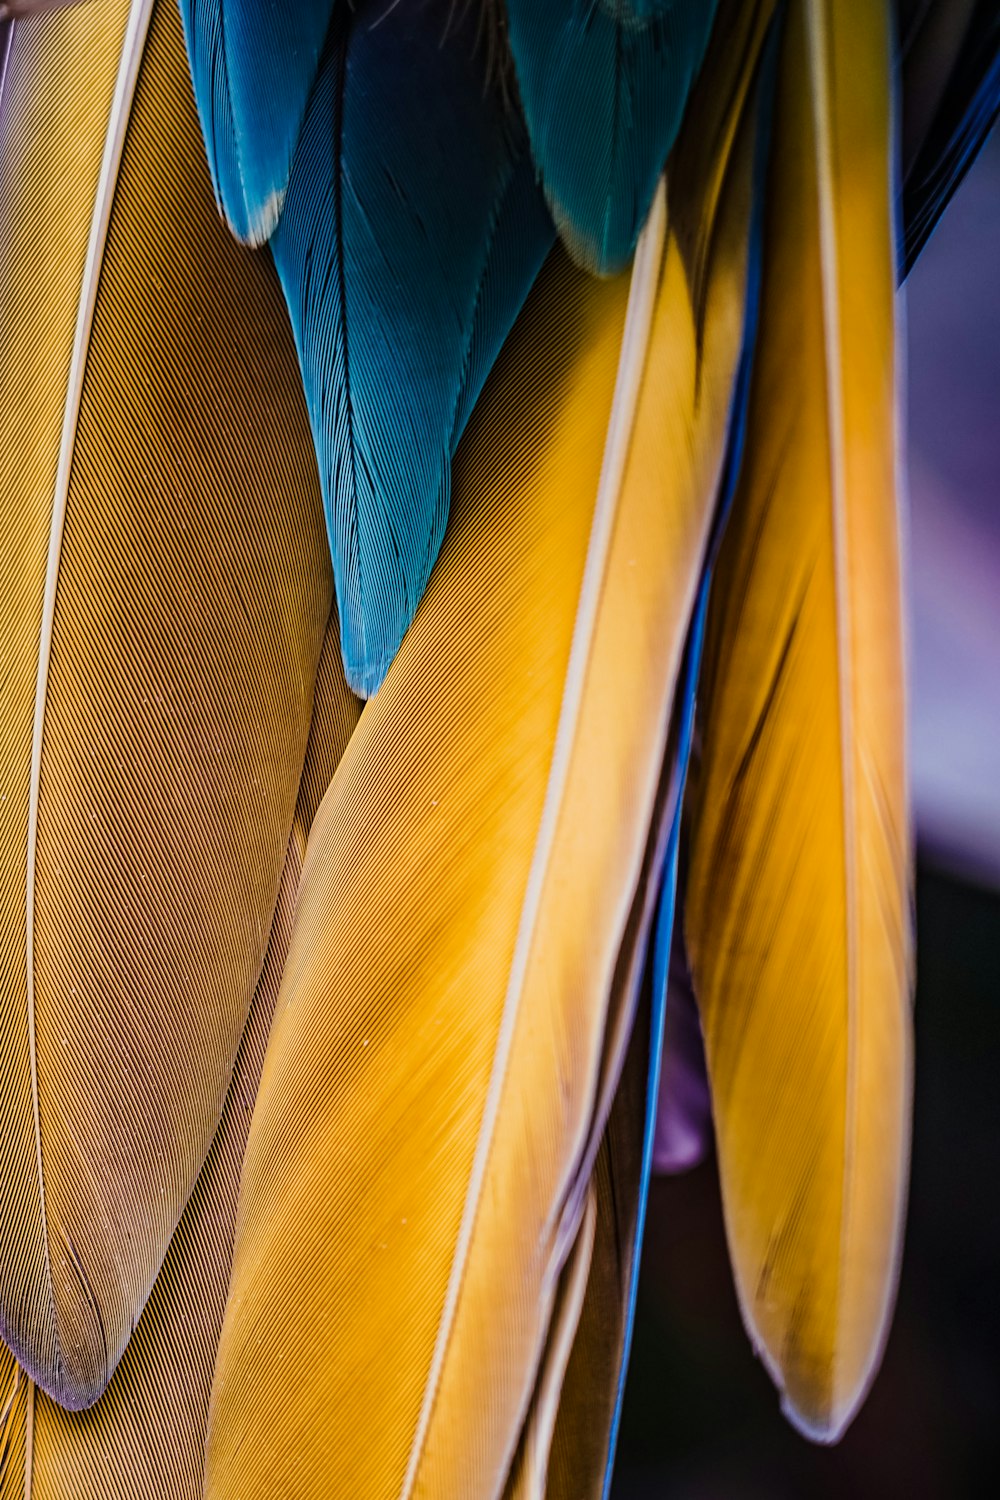 a close up of a yellow and blue bird's feathers